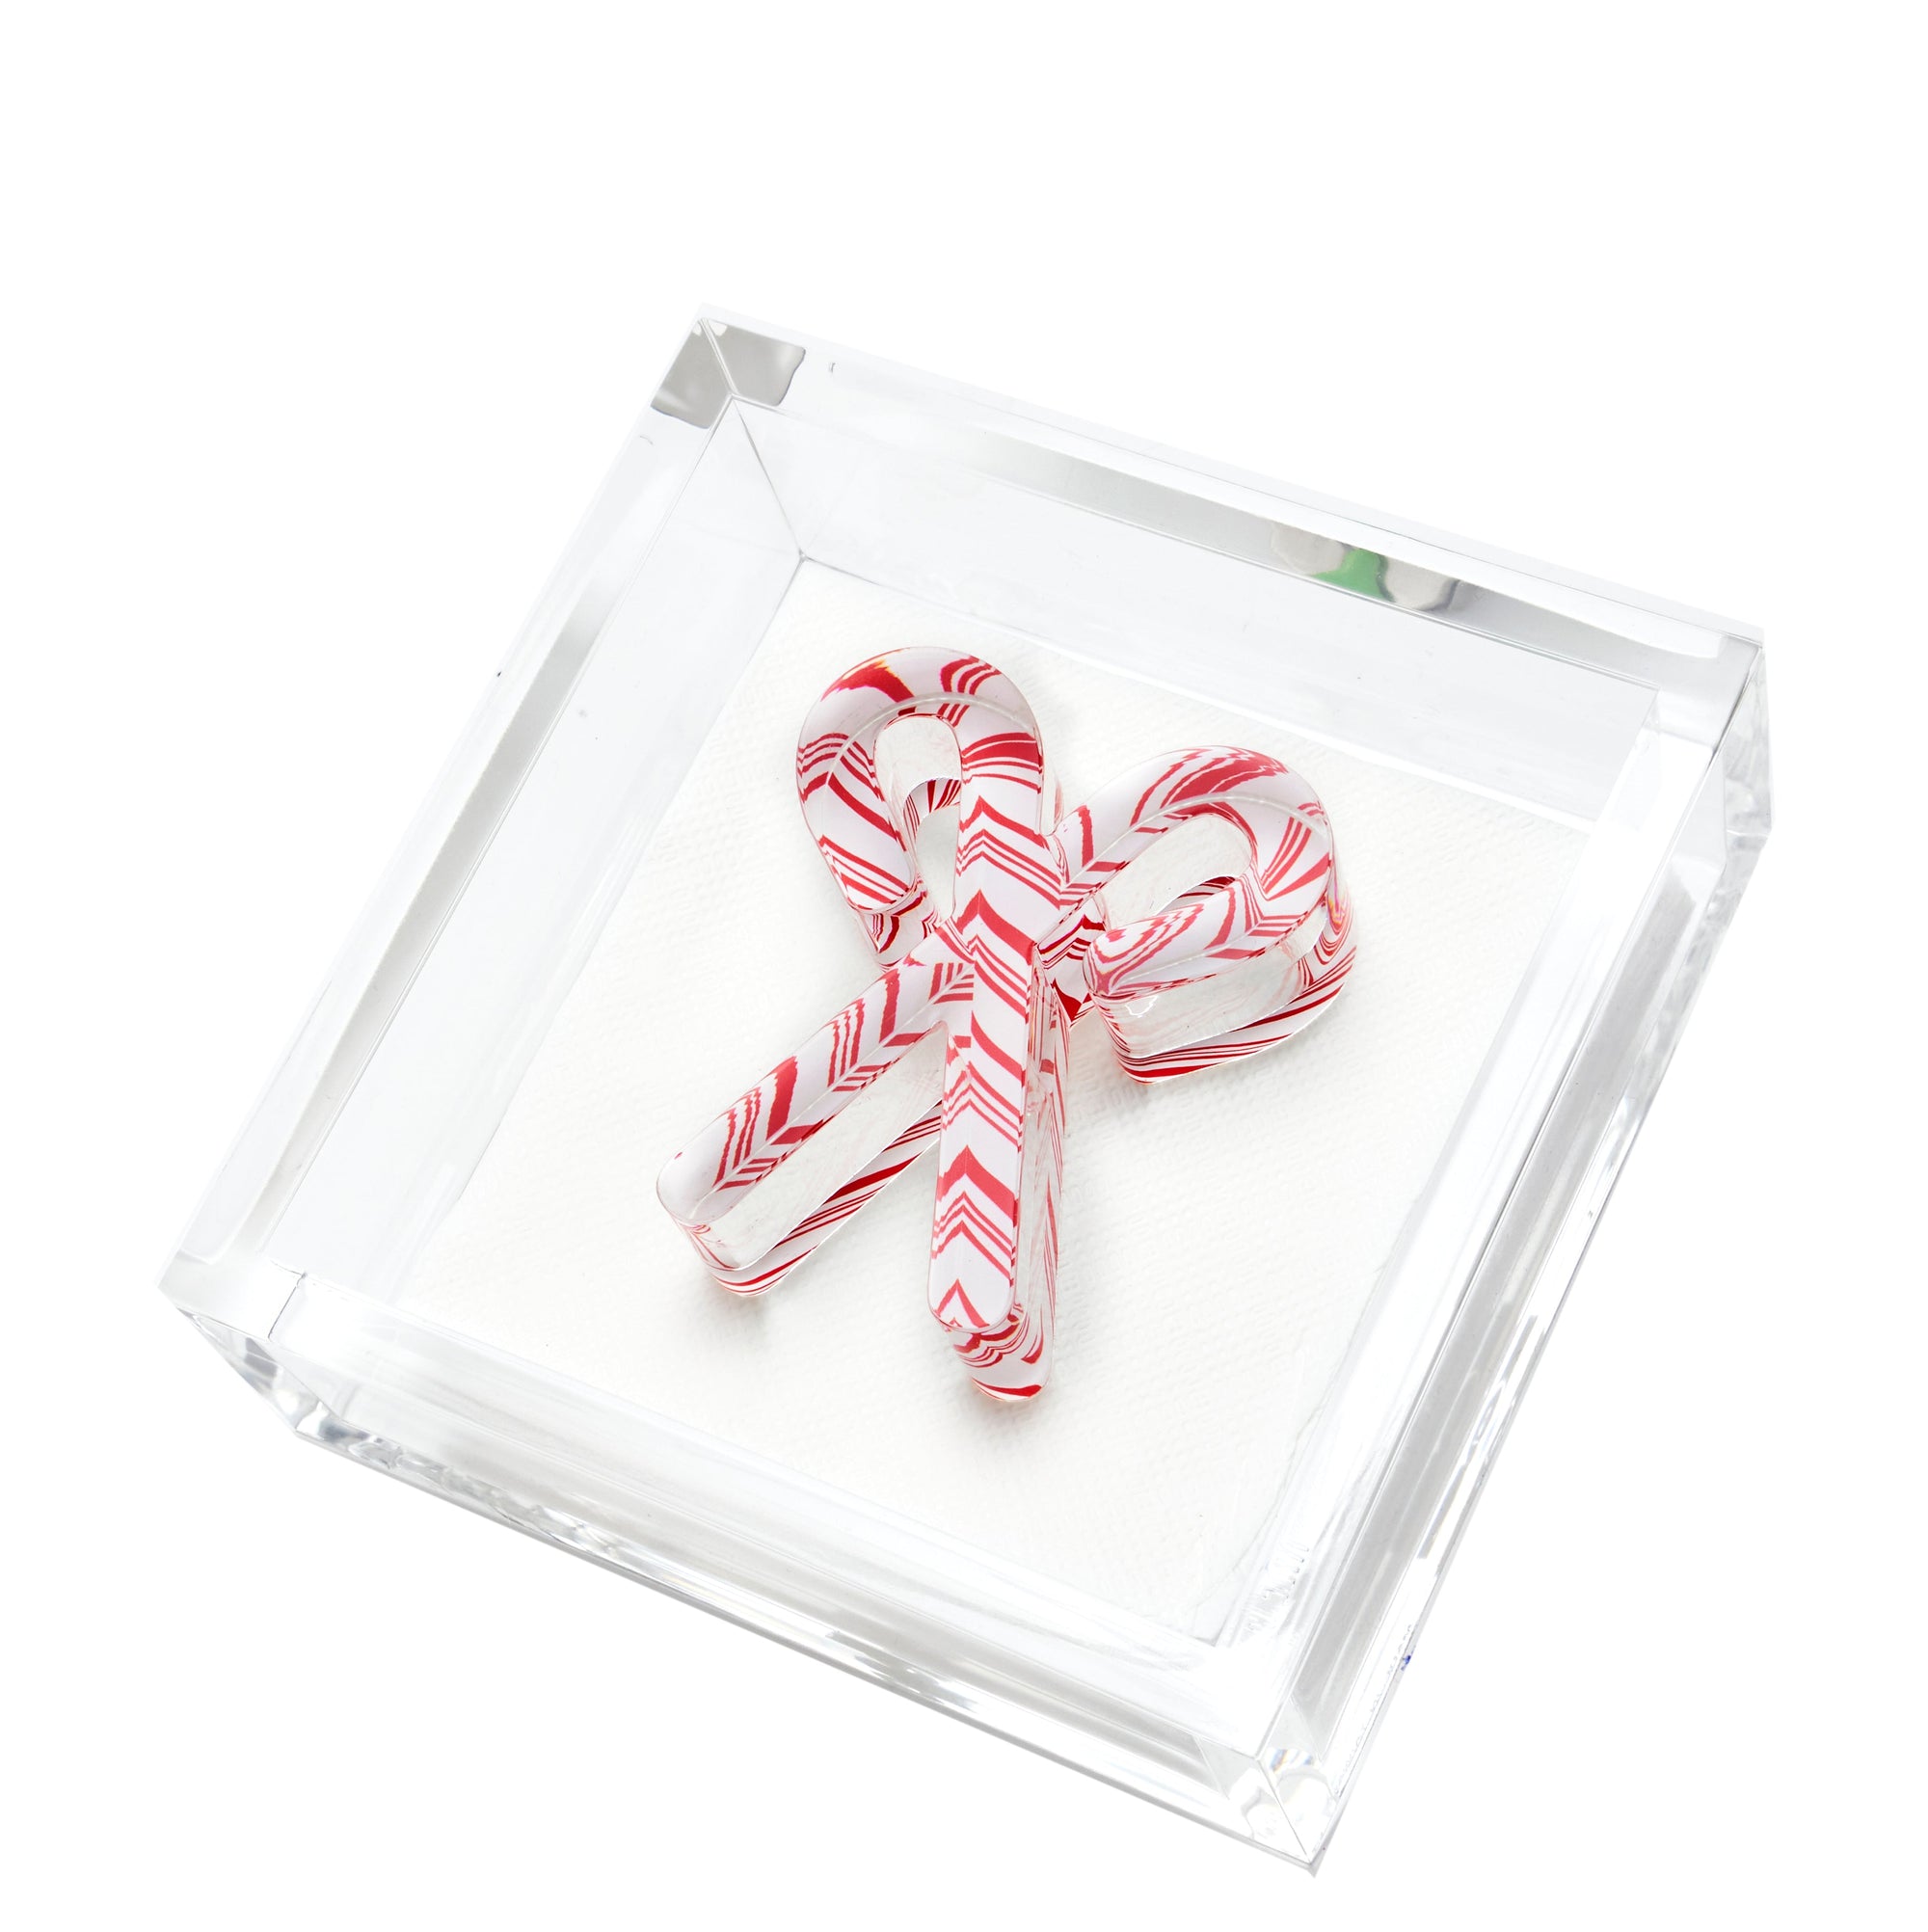 Cocktail Napkin Holder CANDY CANES 4 inches by 4 inches 